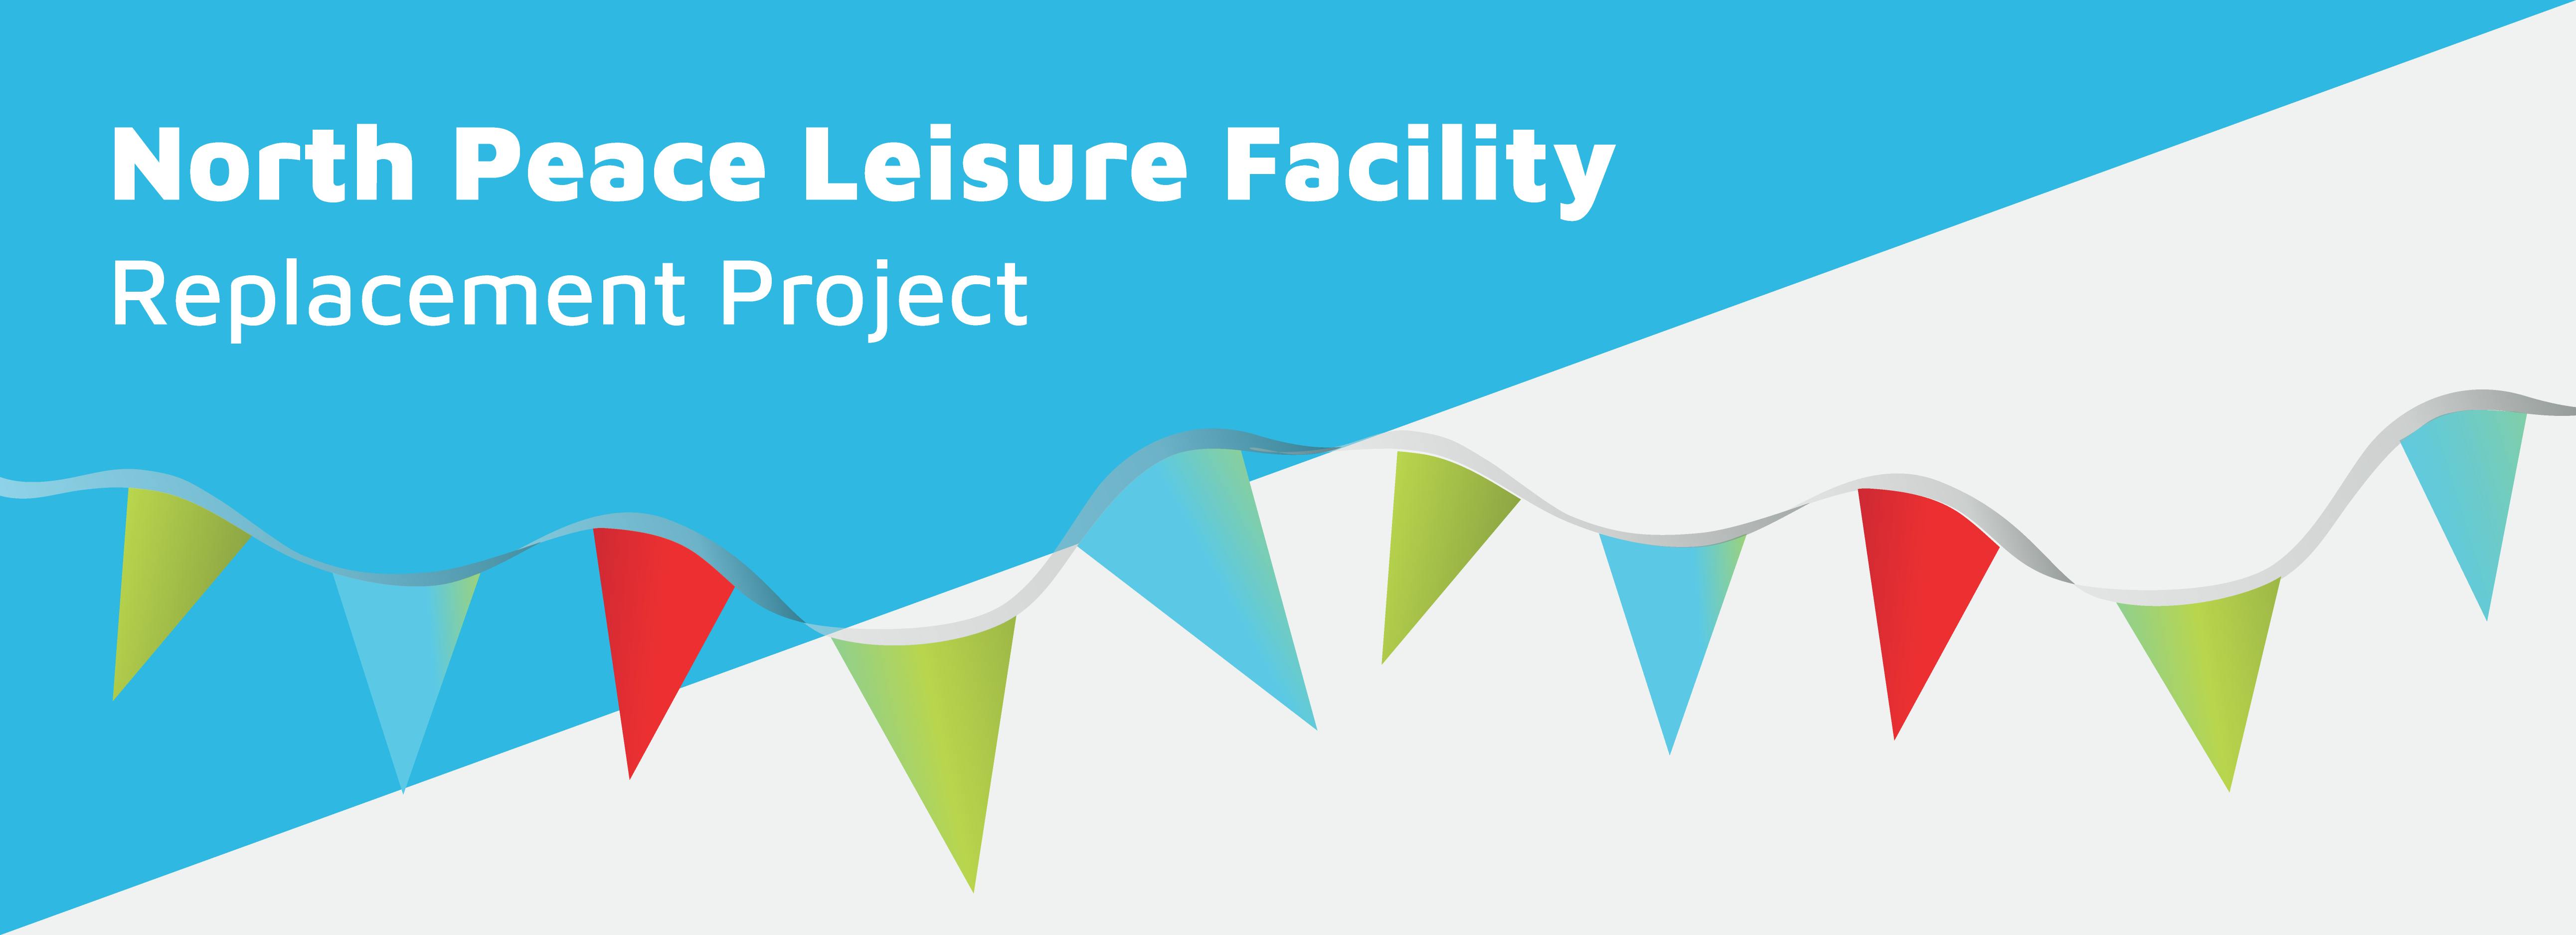 Blue and white banner with multi-colour ribbons across with the text "North Peace Leisure Facility Replacement Project"